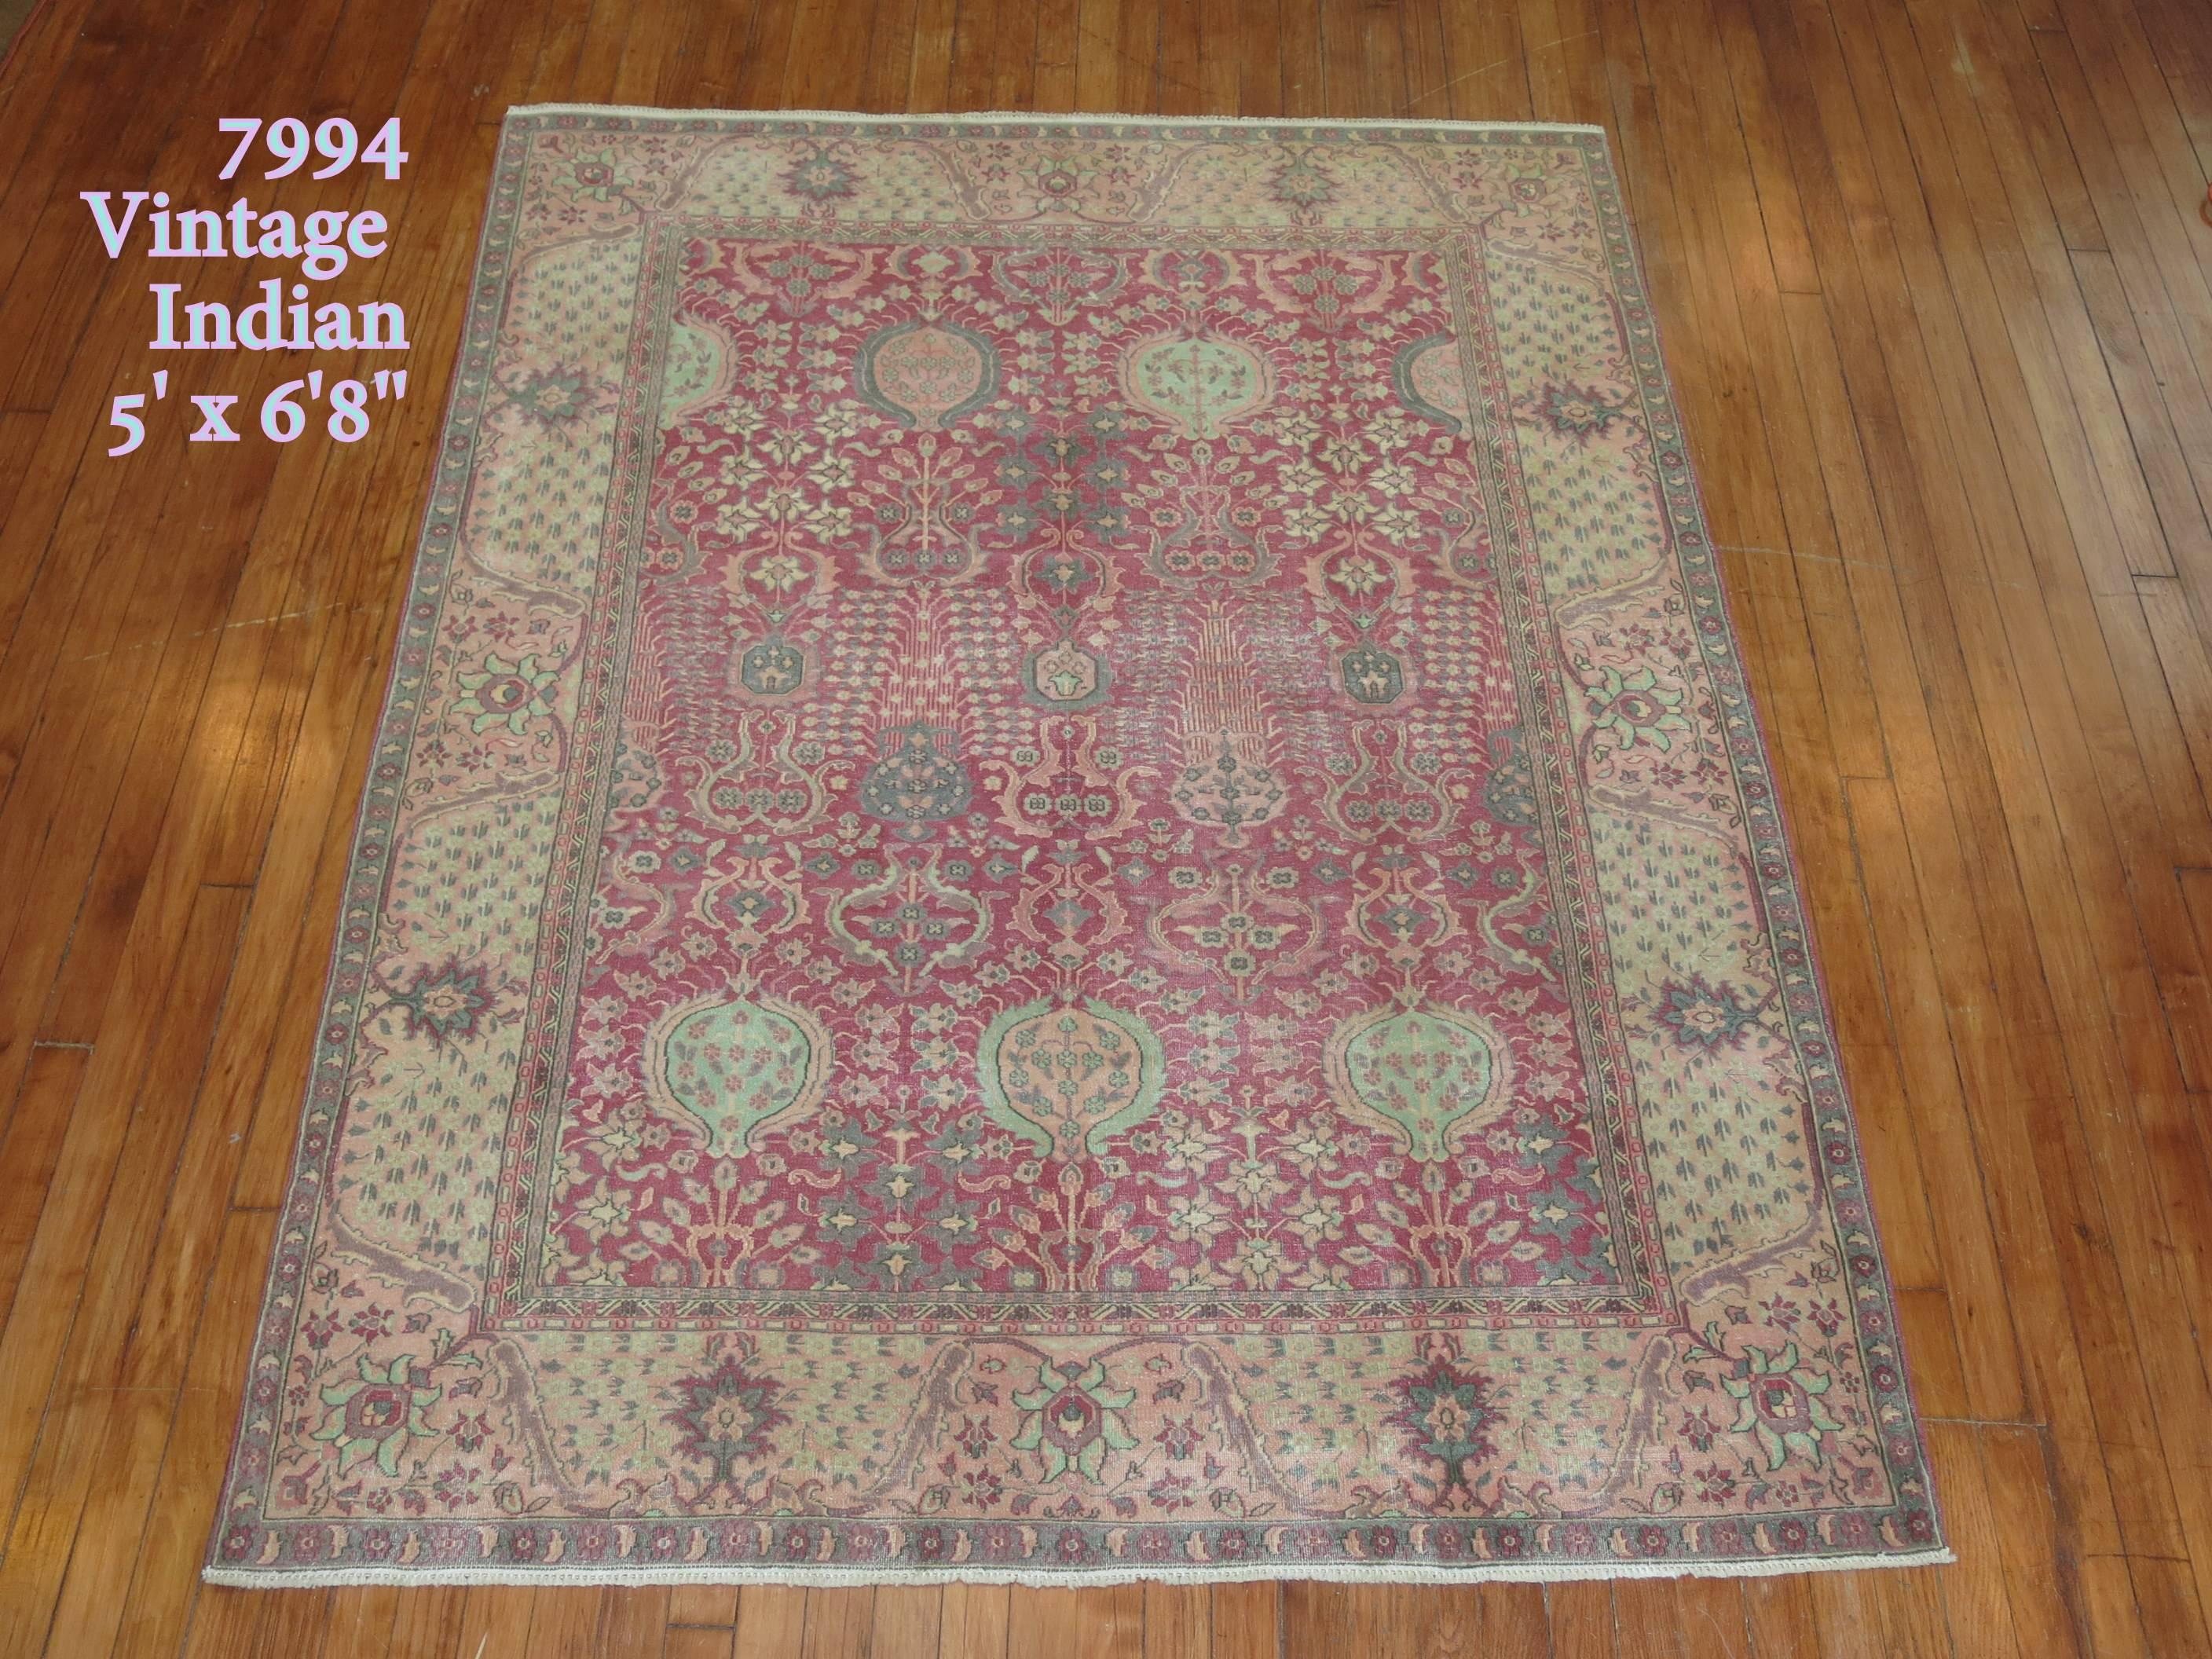 Vintage Indian Lahore rug predominantly in pink. Mint green, gray and pink accents

Size: 5' x 6'8